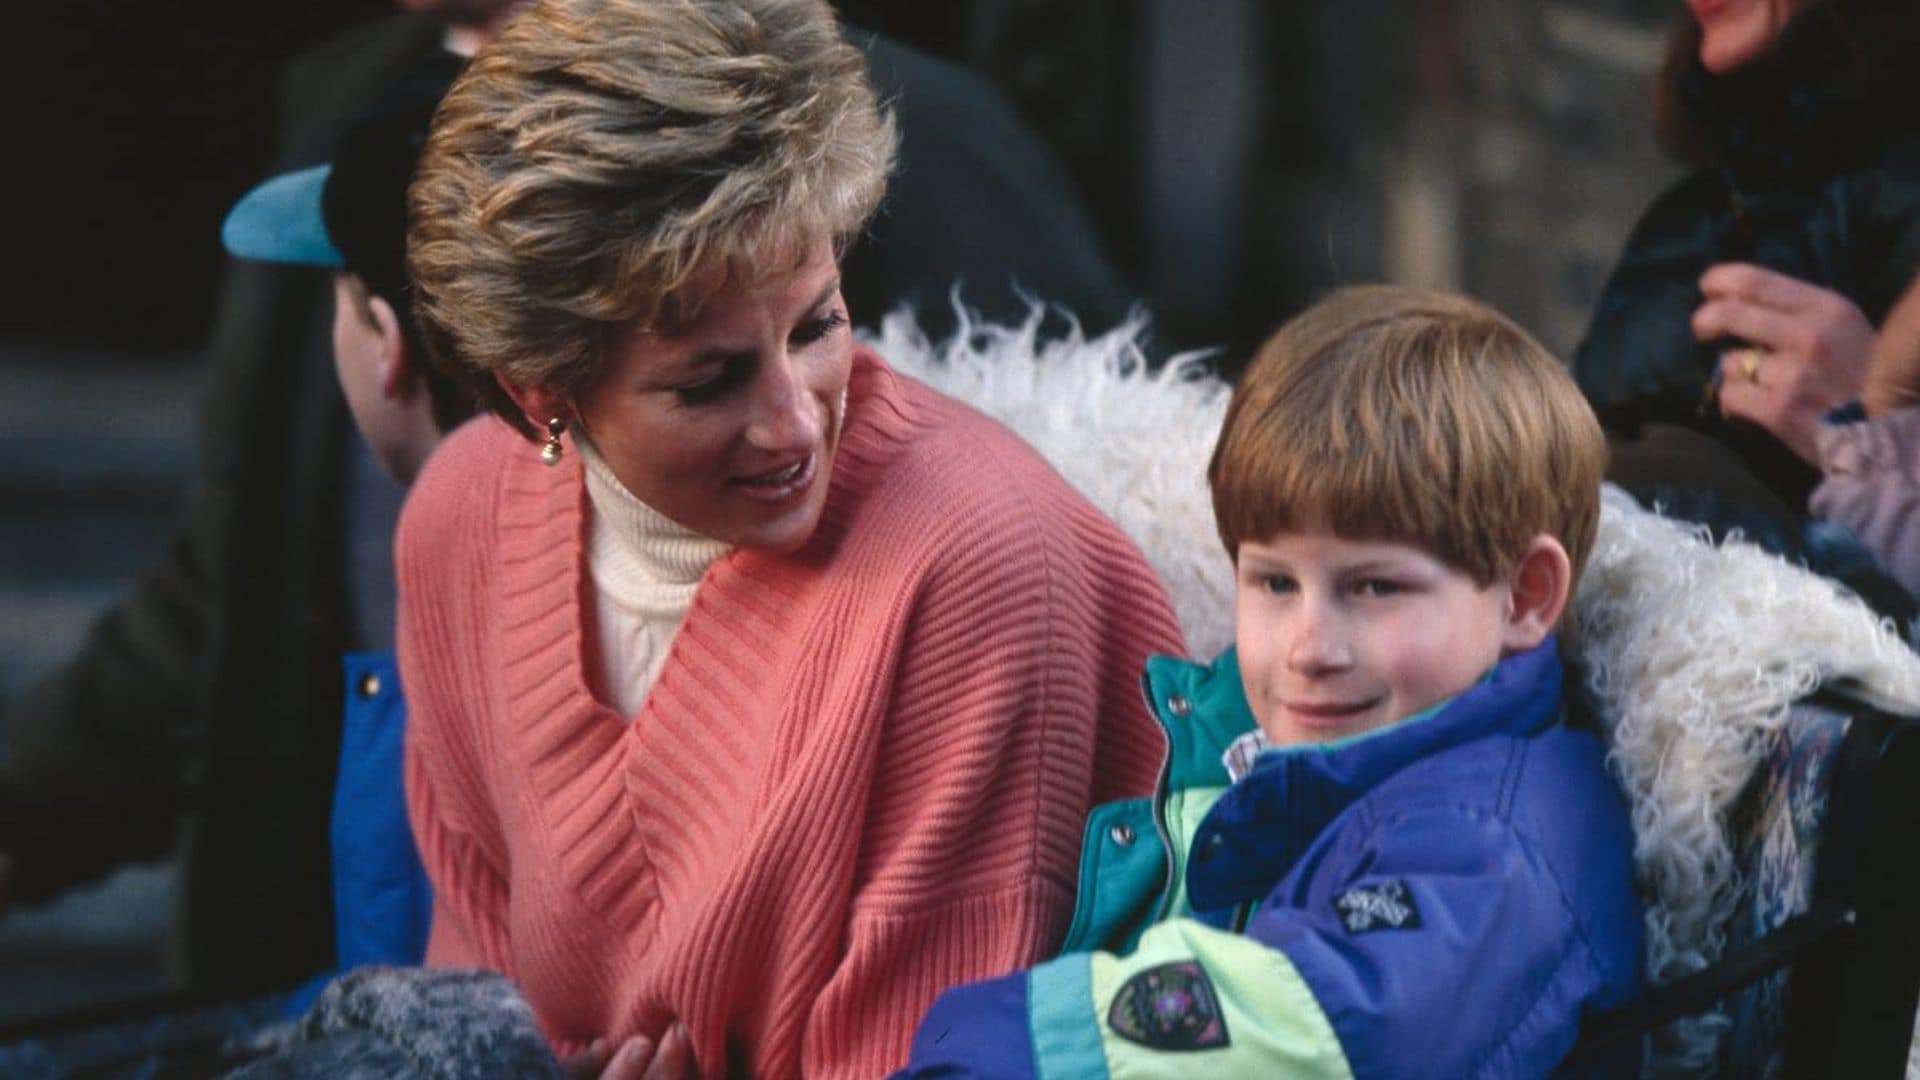 Prince Harry says he is living the life that mom Princess Diana wanted to live for herself